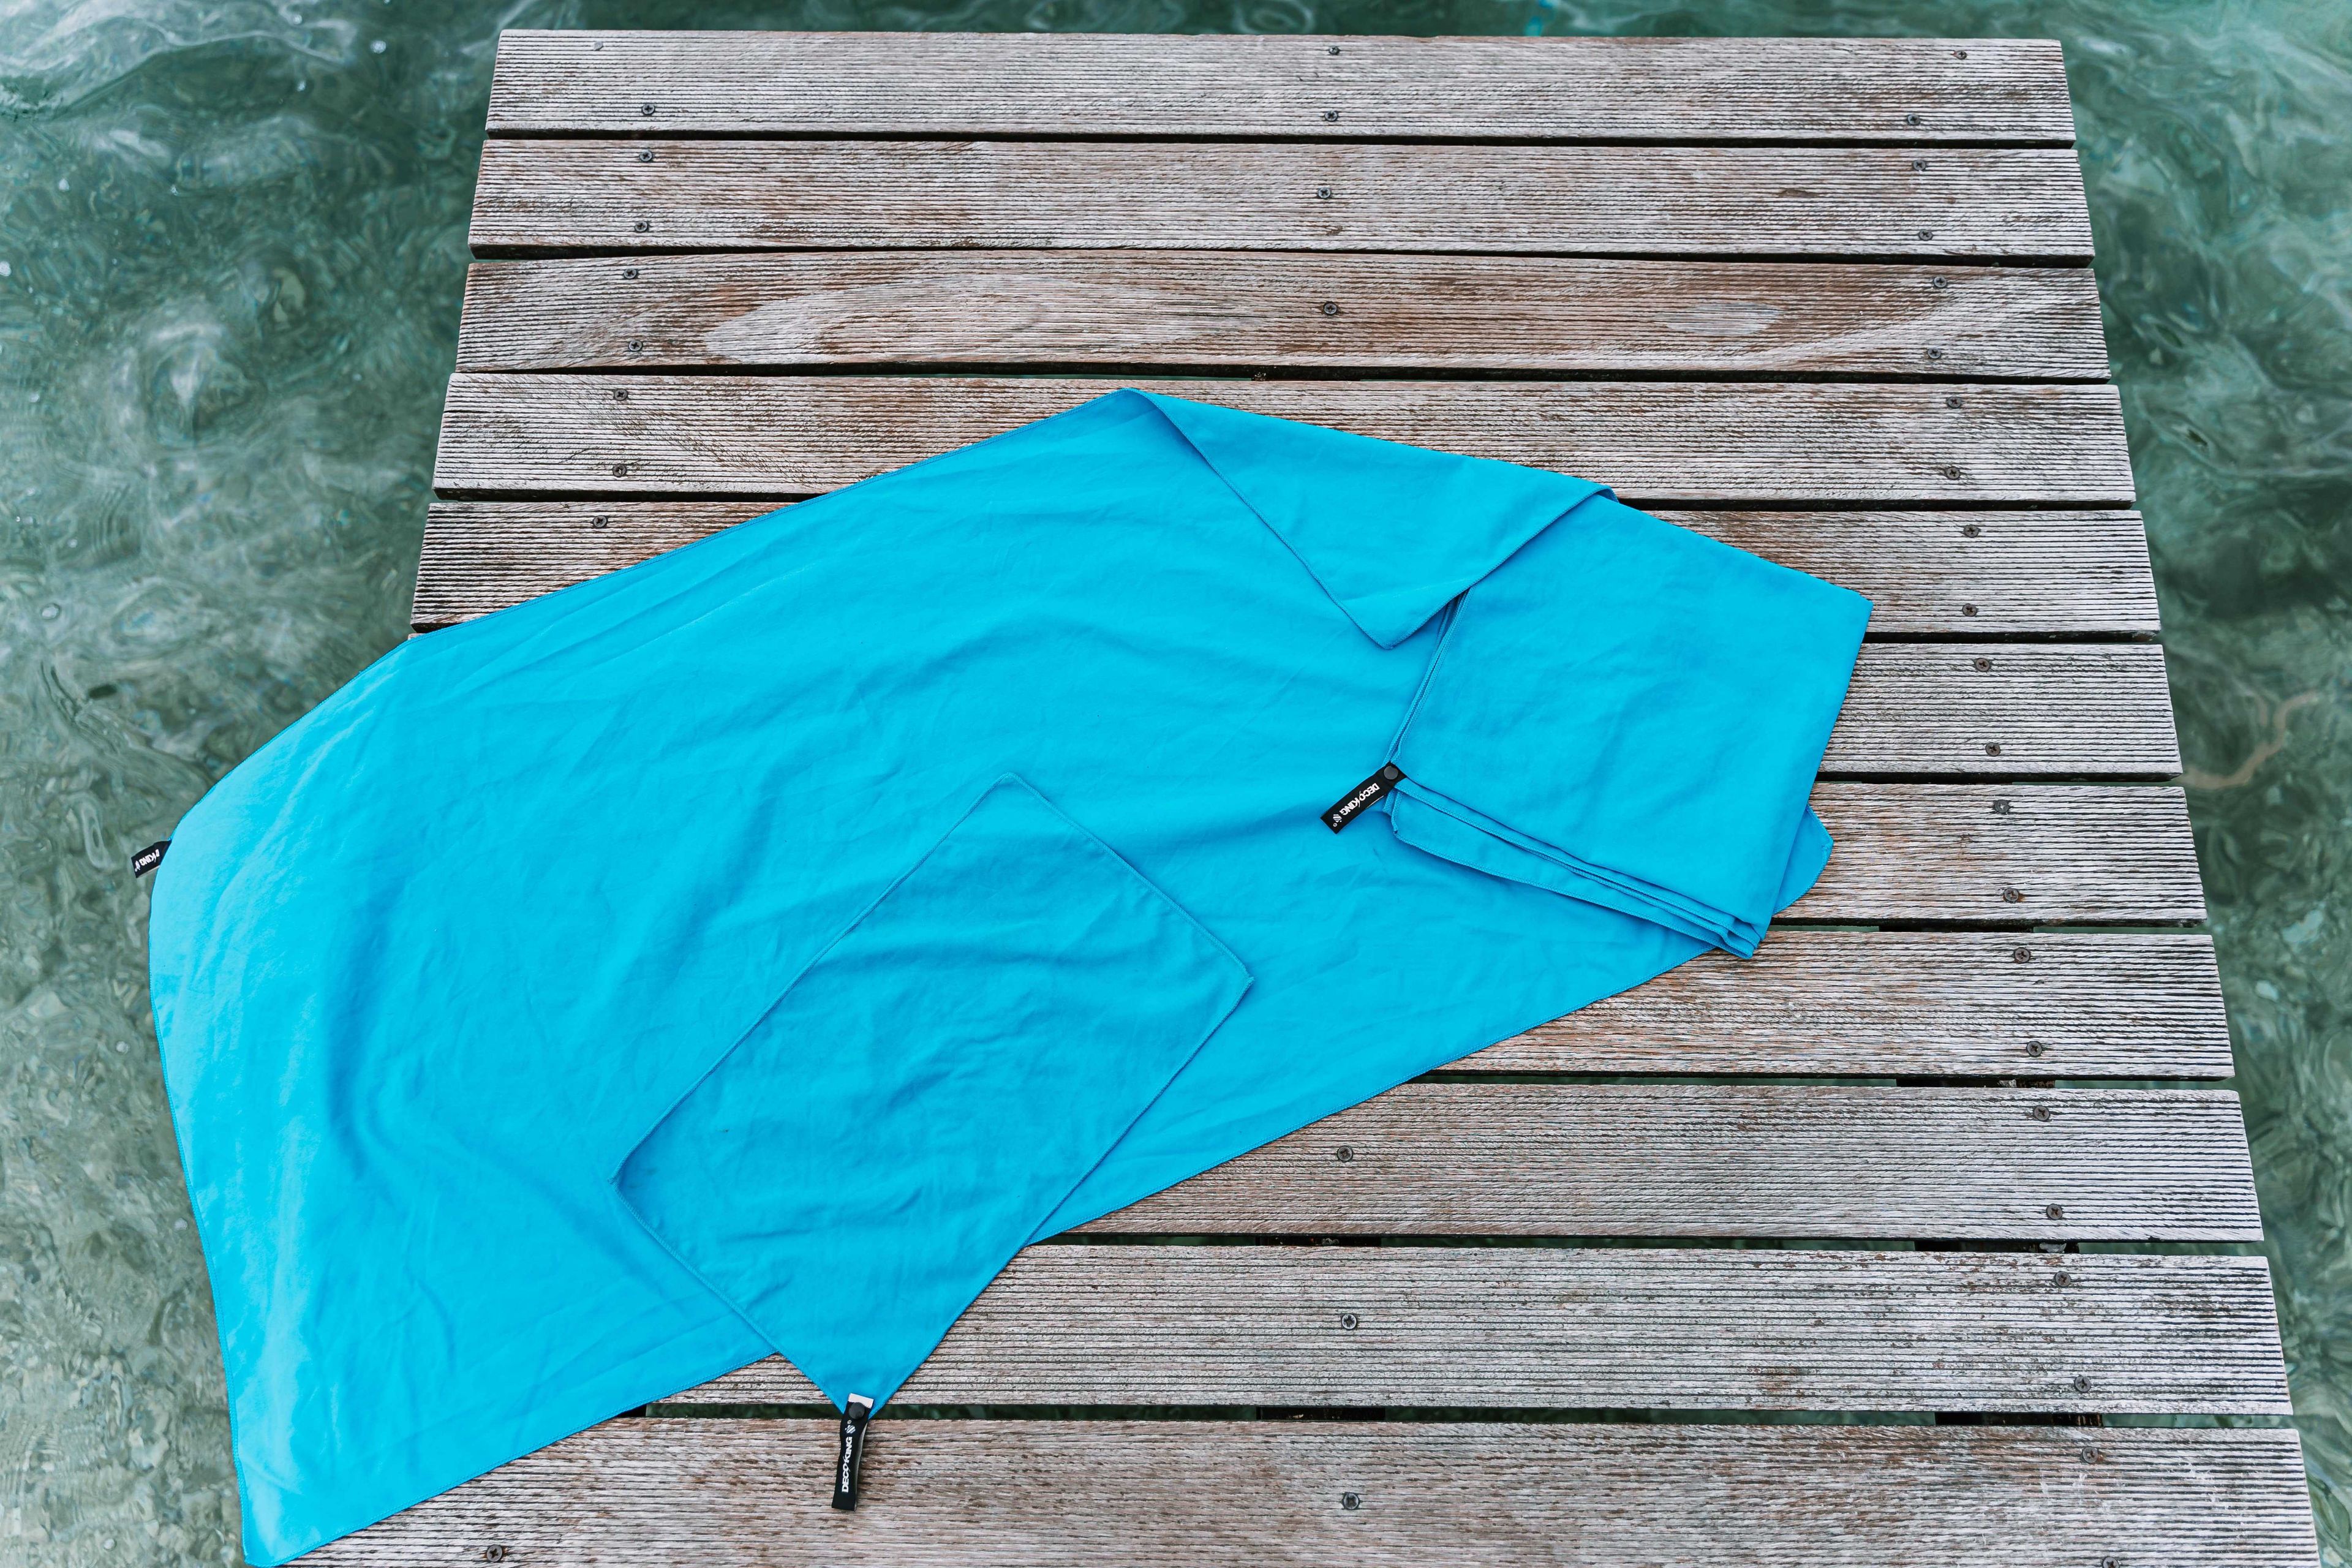 Blue microfiber towels on dock by the lake.